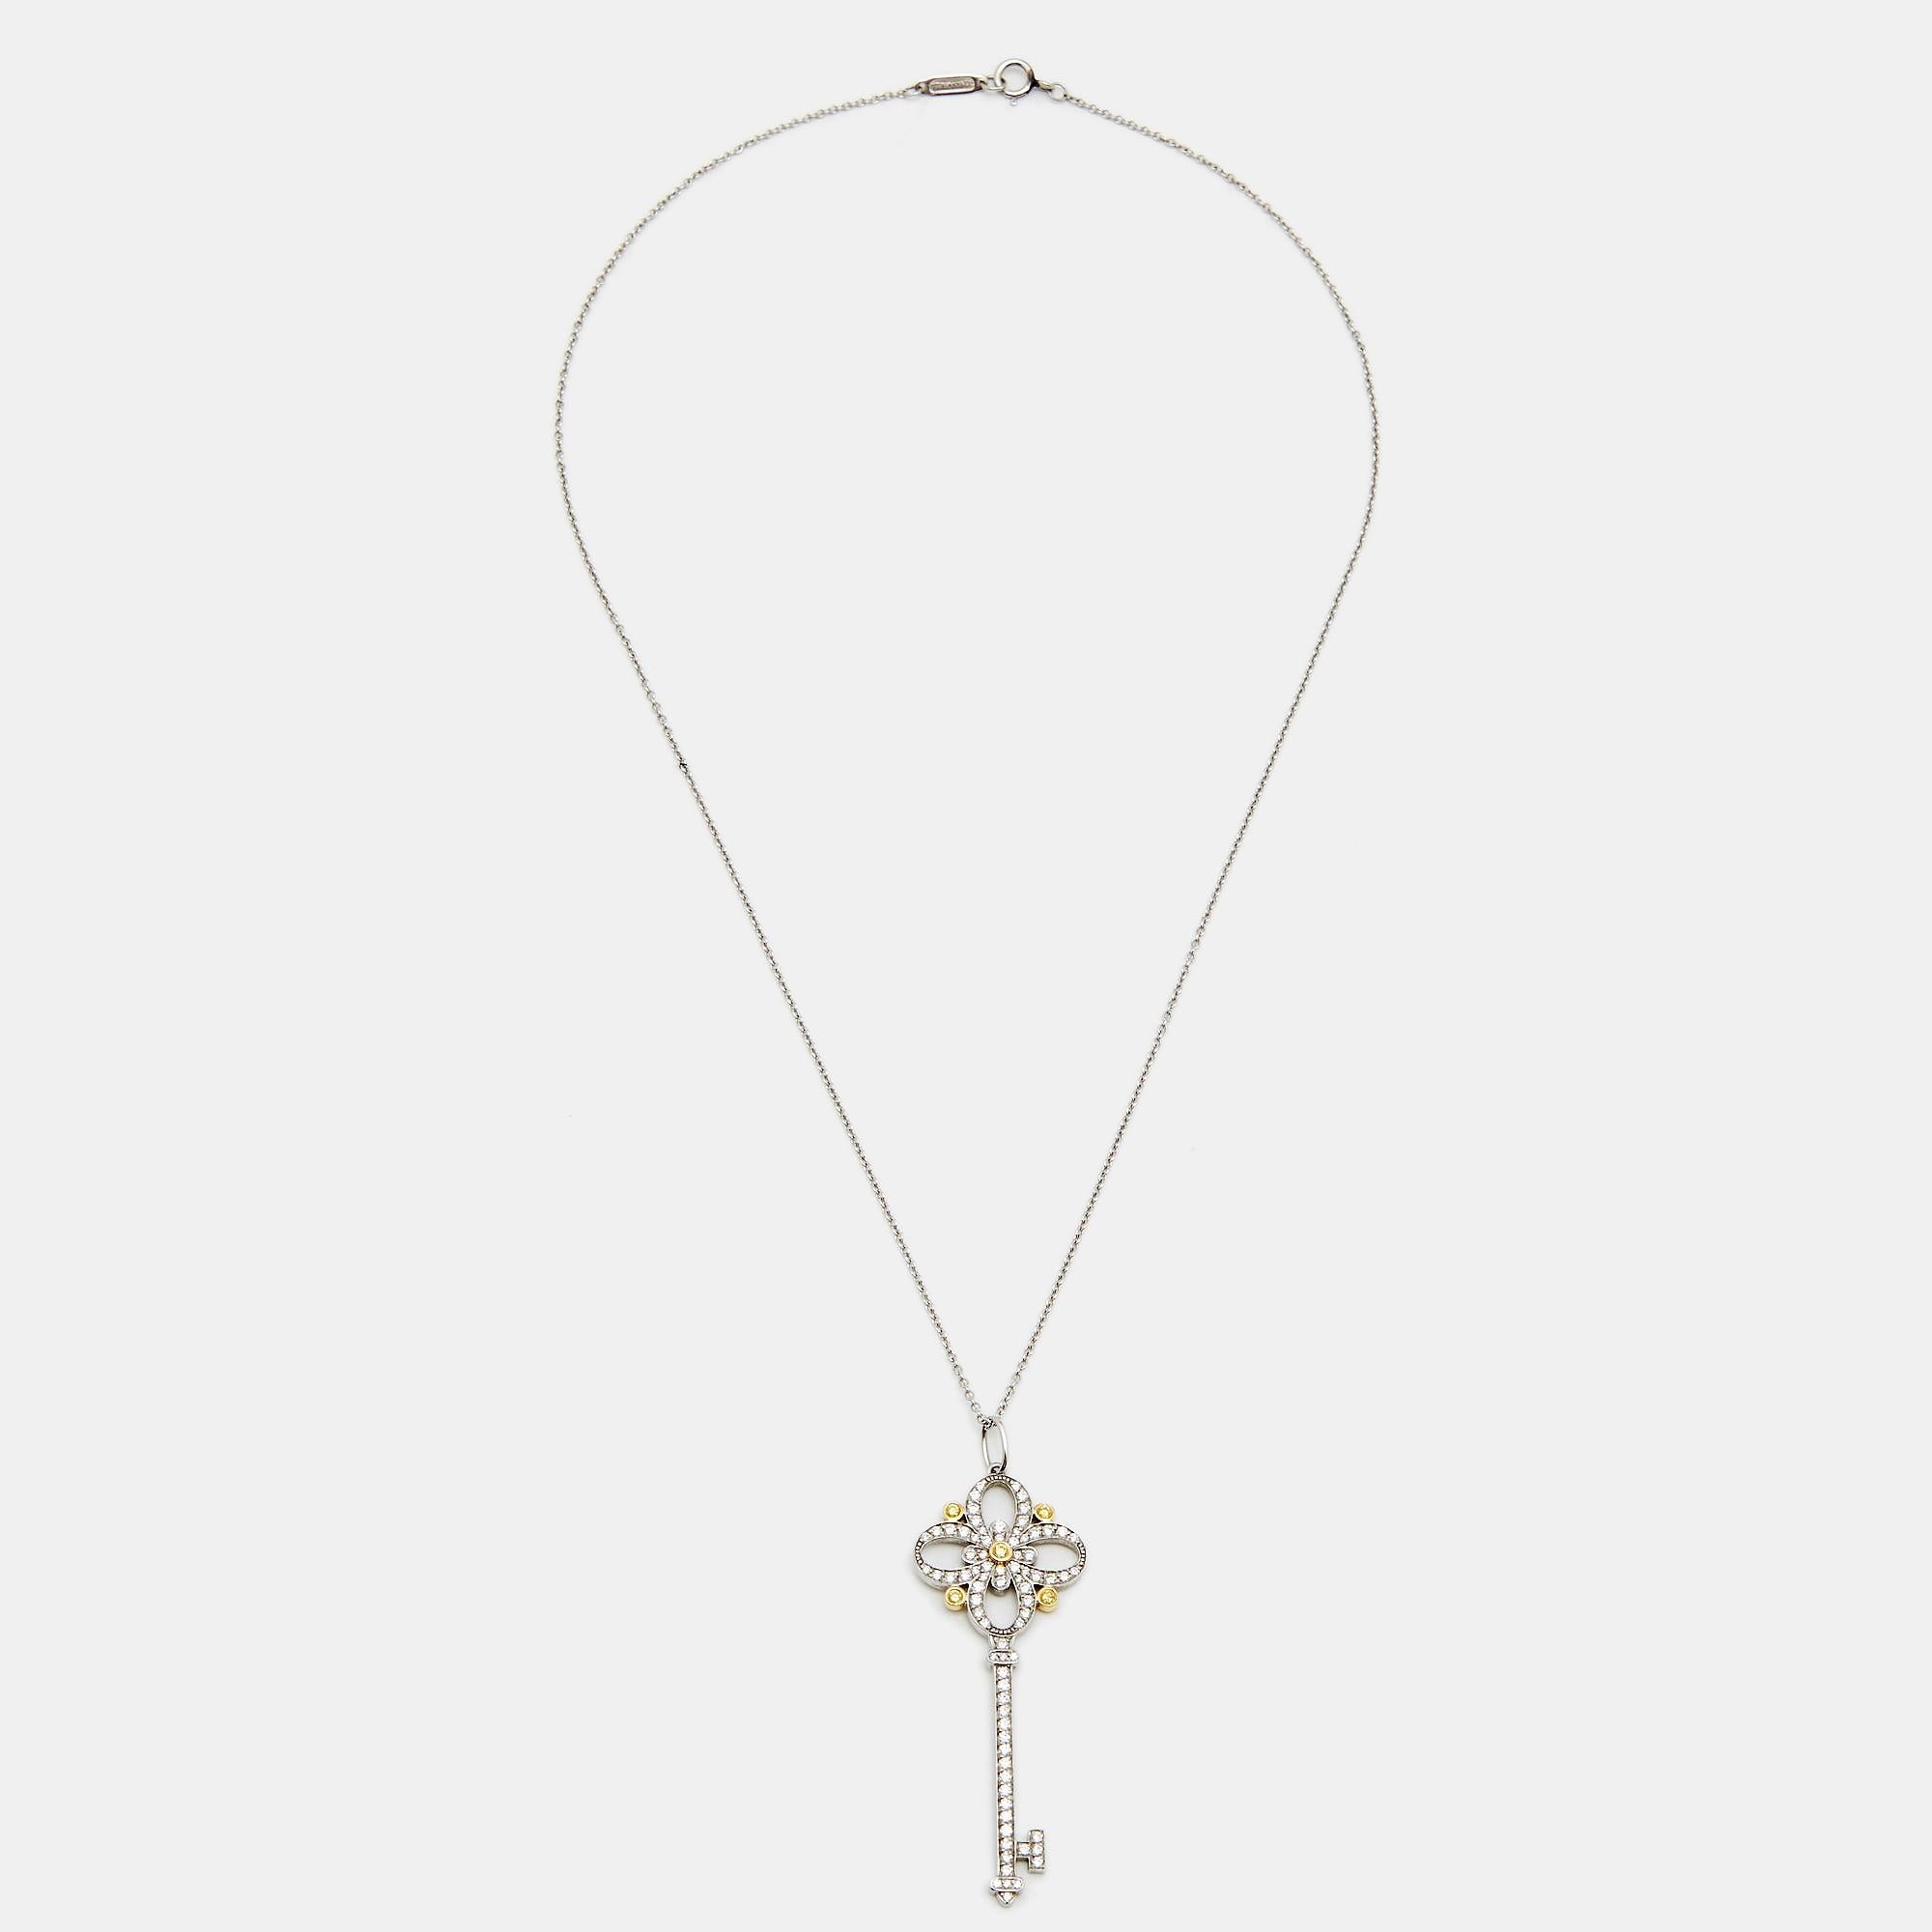 Radiating hope & optimism and symbolizing a bright future, the Tiffany keys from Tiffany & Co. are much loved and instantly recognizable. This necklace, featuring the Tiffany key pendant, comes crafted from platinum and 18k yellow gold. The key is